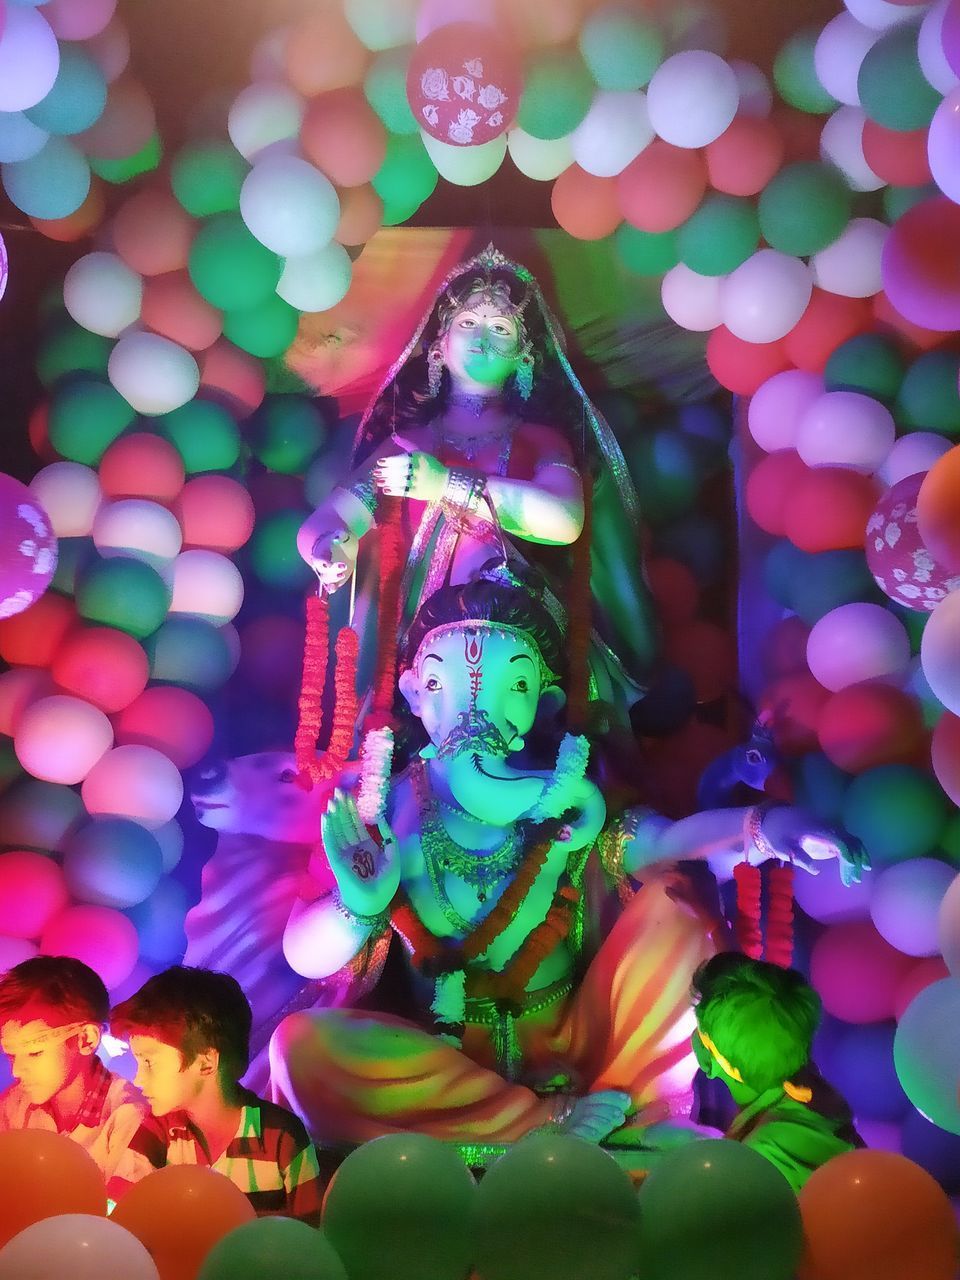 HIGH ANGLE VIEW OF ILLUMINATED SCULPTURE IN TEMPLE